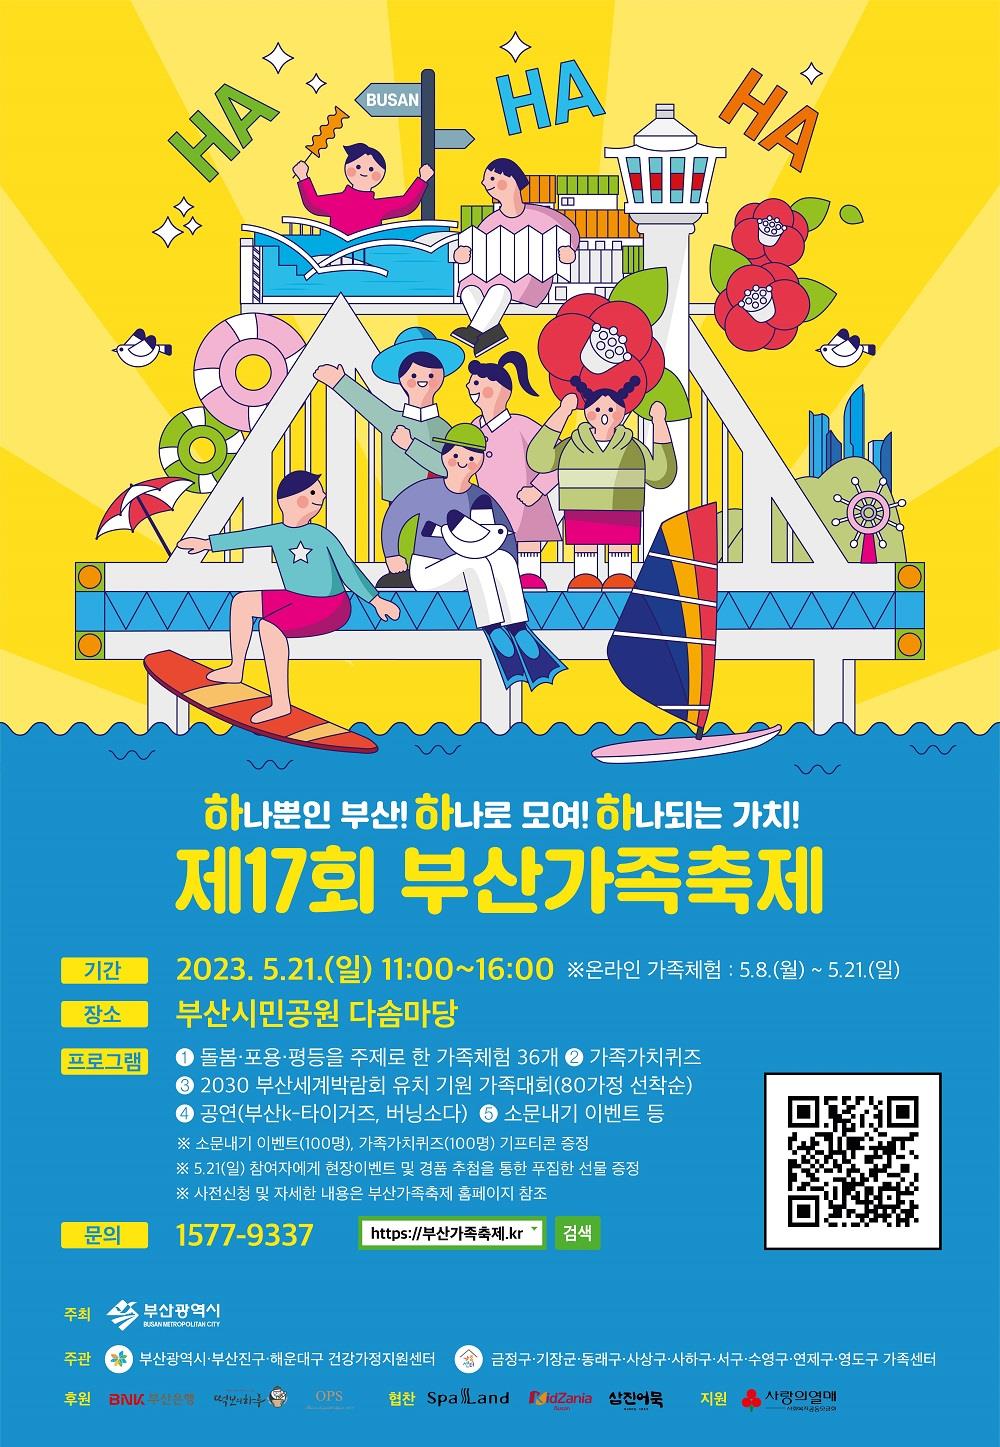 17th Busan Family Festival celebrates all types of families